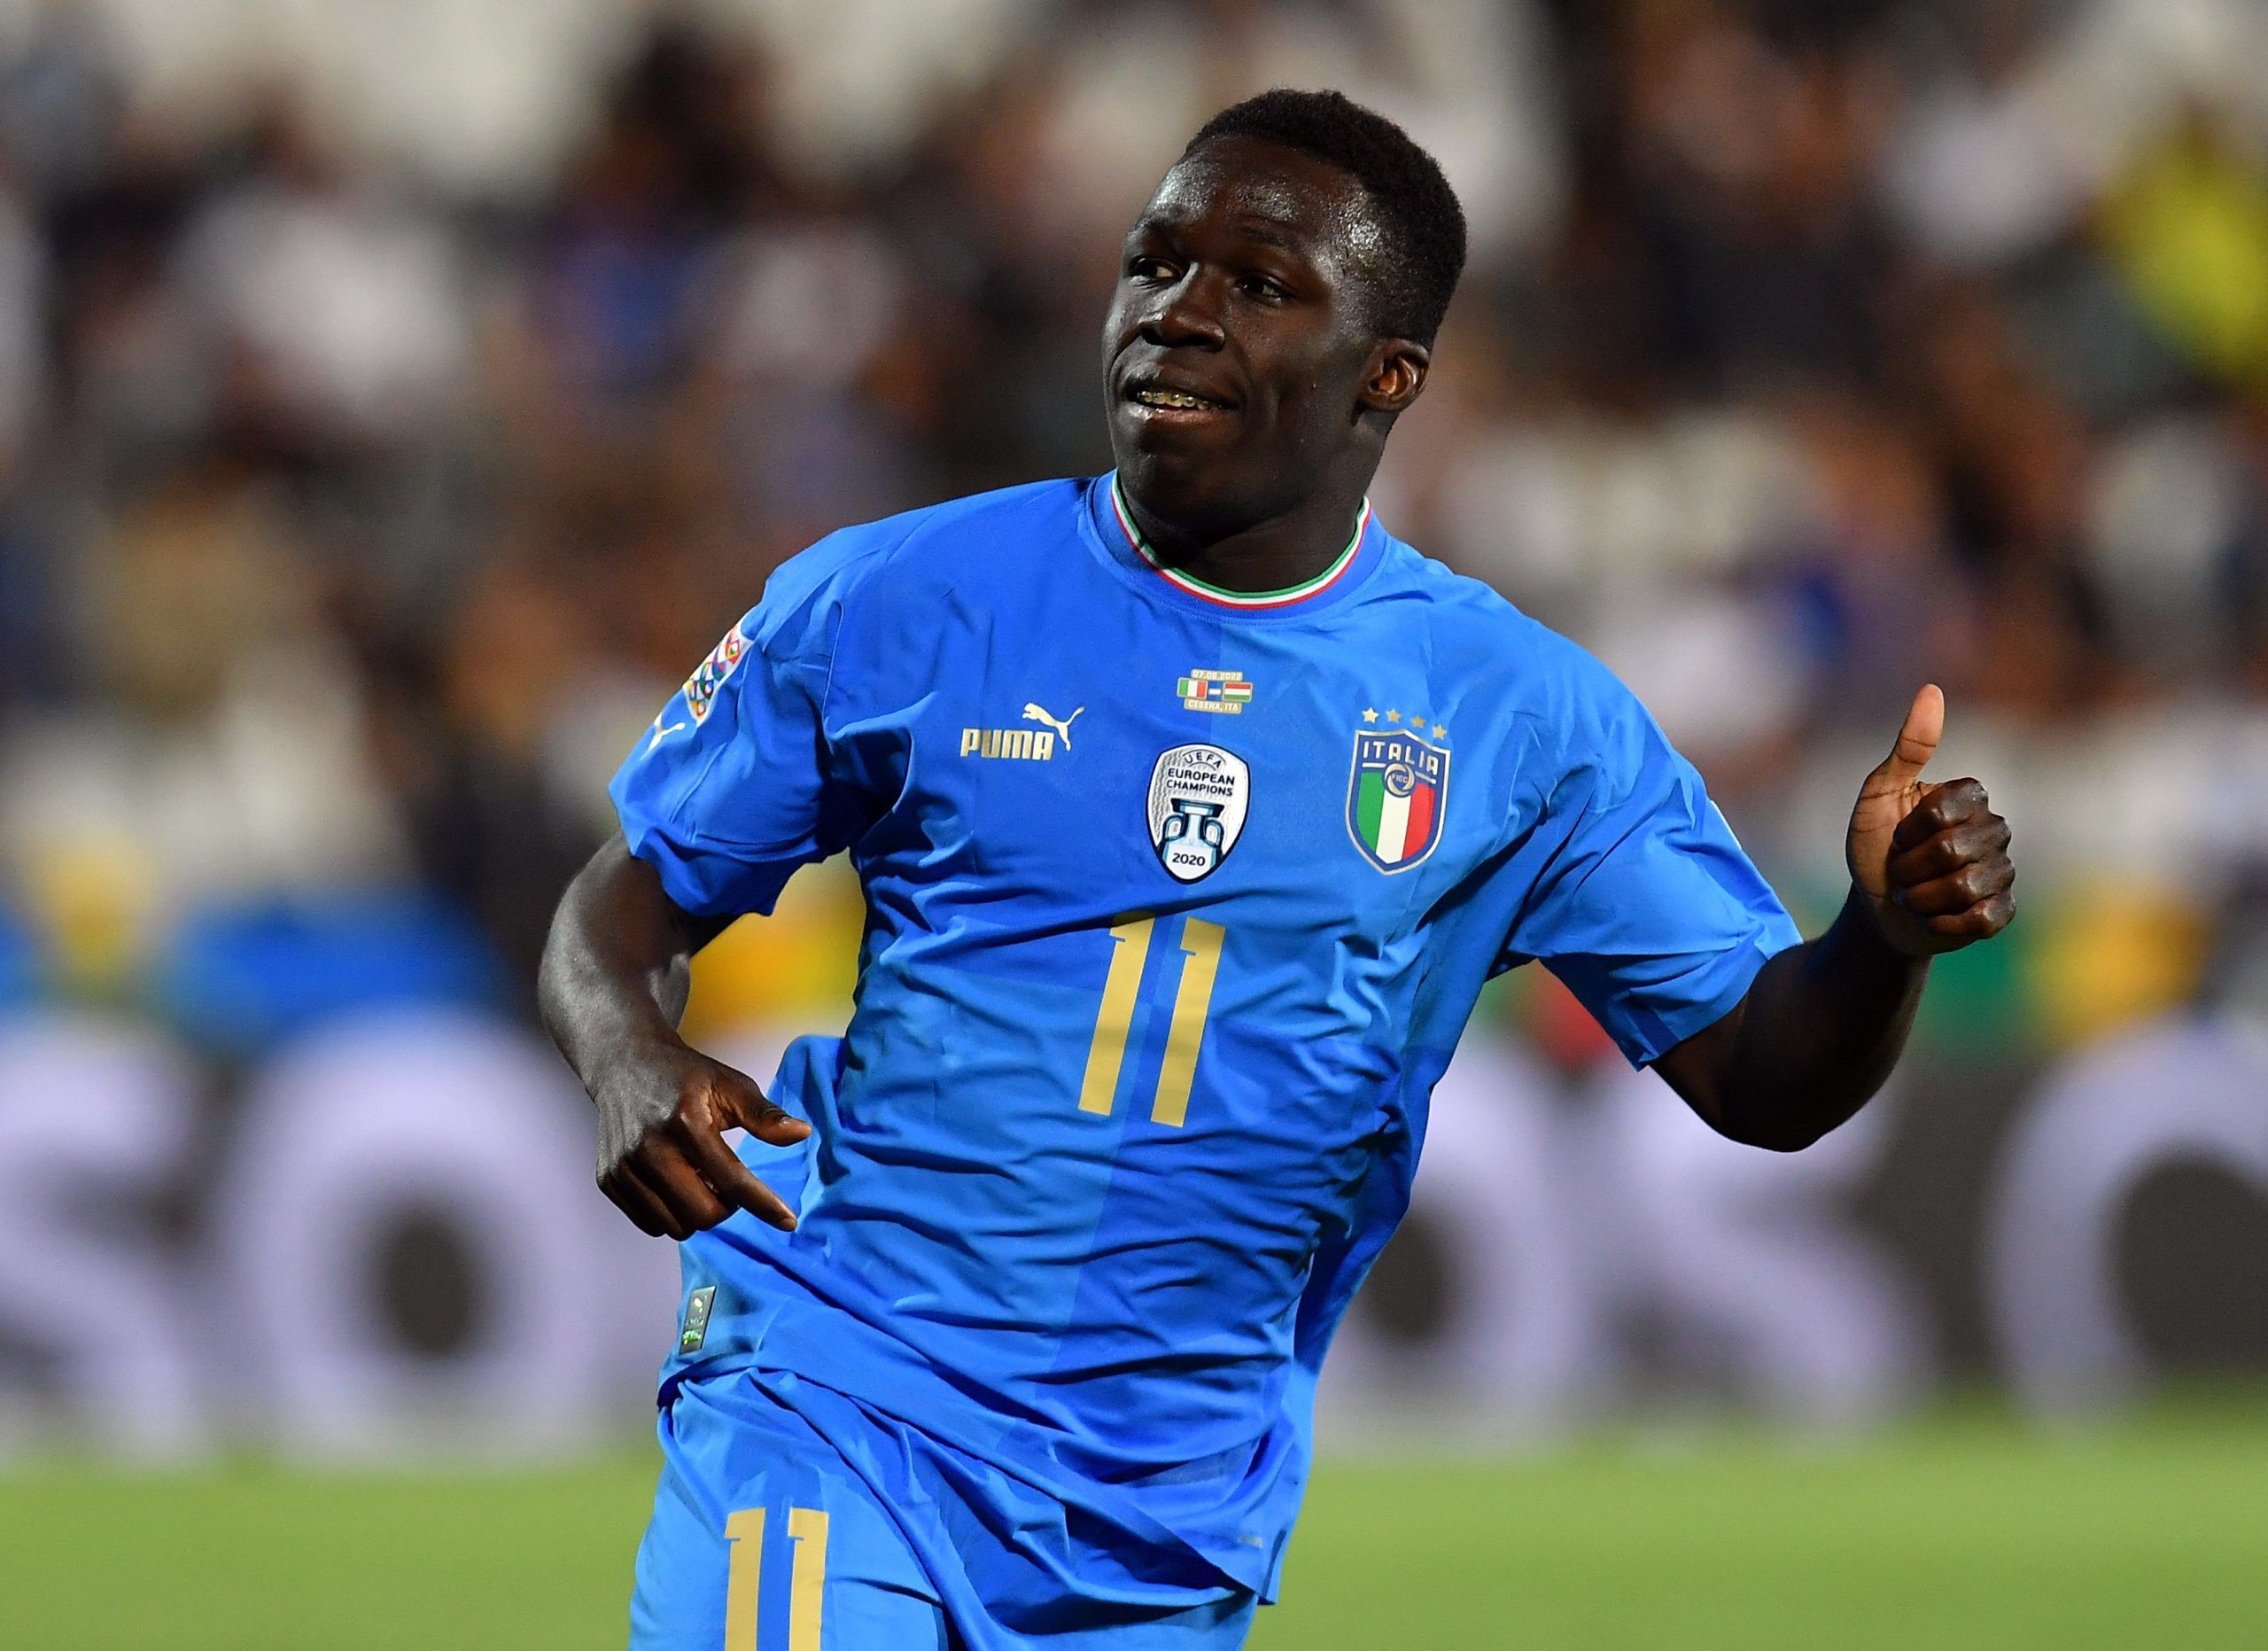 Leeds United: Wilfried Gnonto’s Italy showing is good news for Leeds, says Phil Hay -Leeds United News